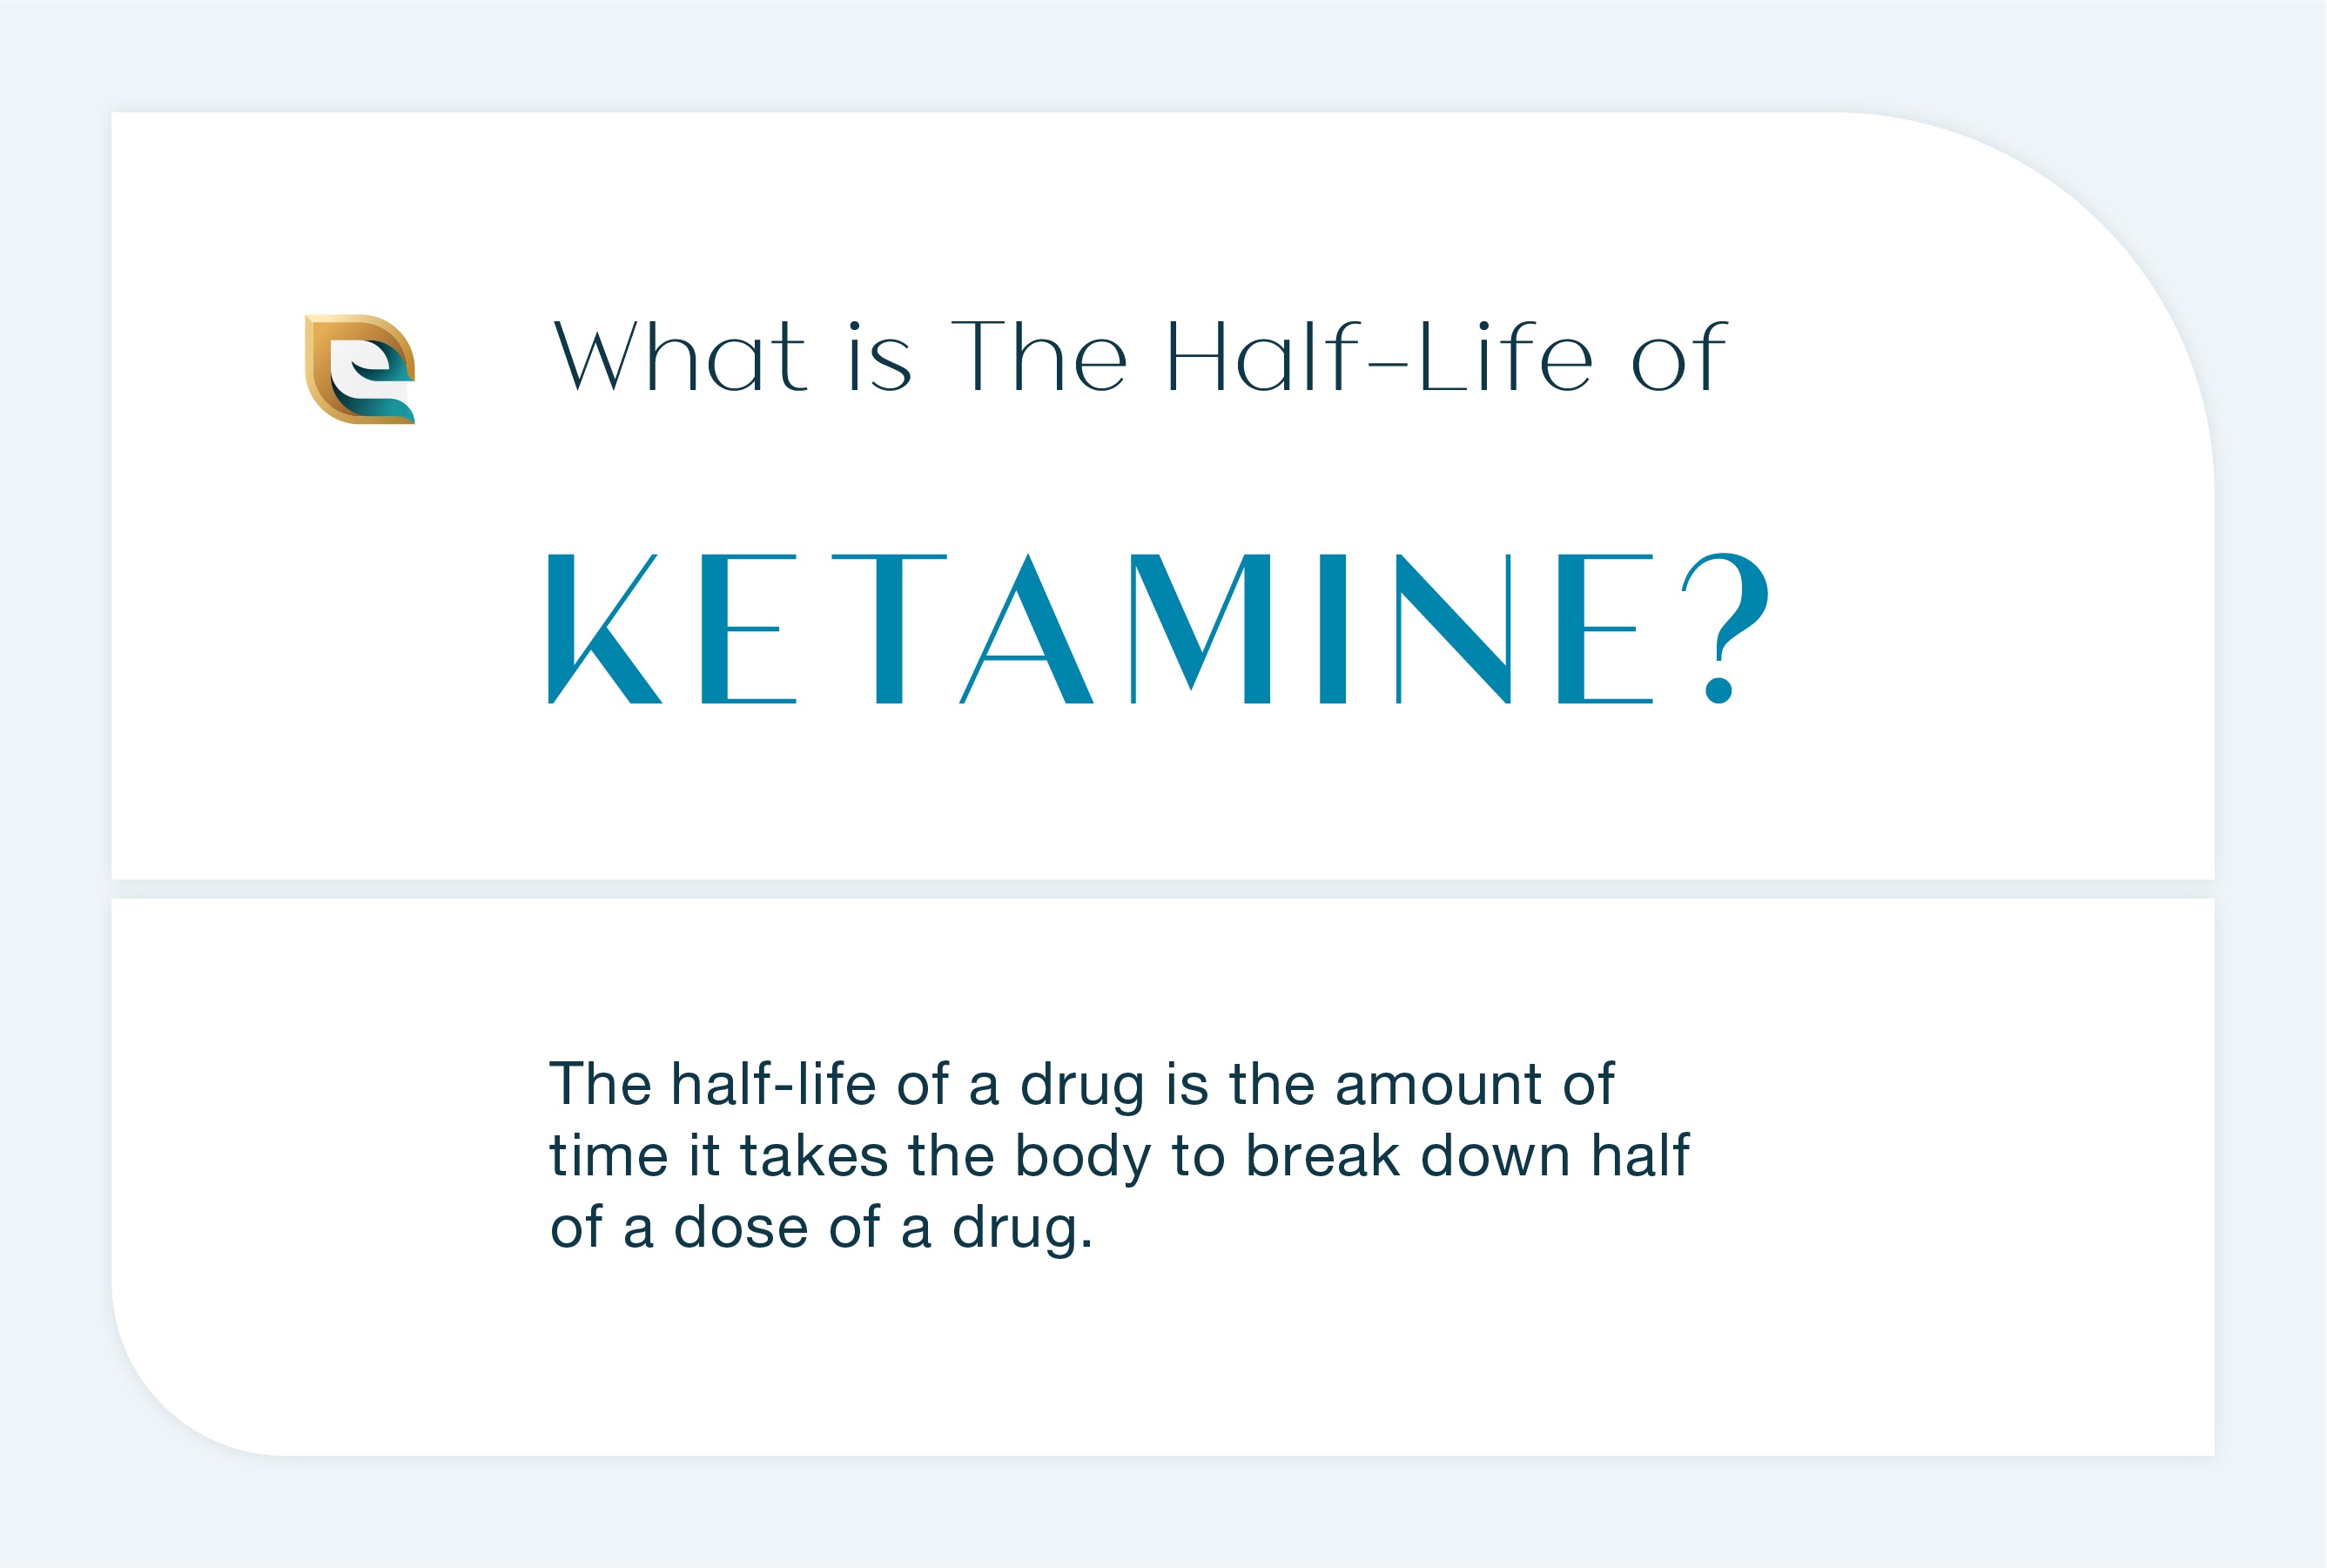 What is the half life of Ketamine? This image describes the half life of Ketamine